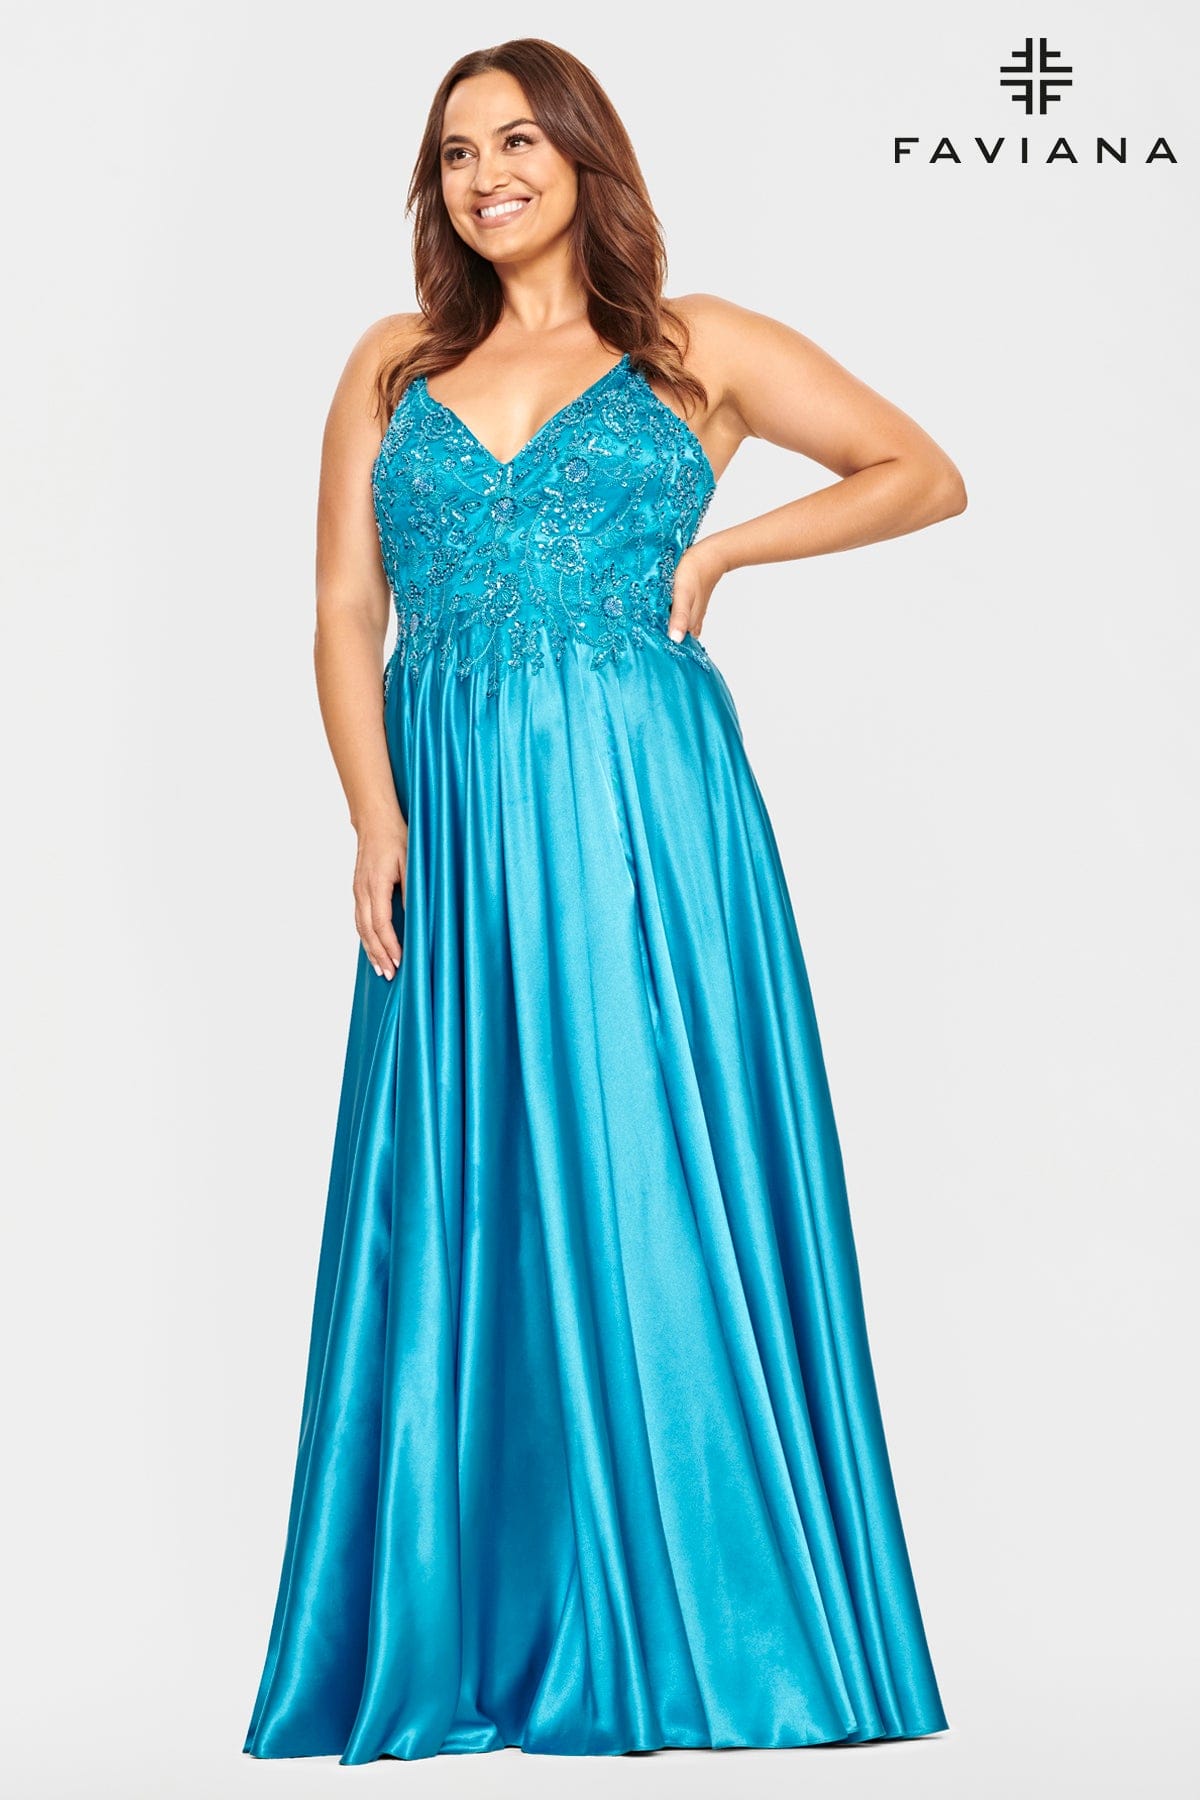 Teal Plus Size V Neck Prom Dress With Flowy Skirt And Beaded Bodice